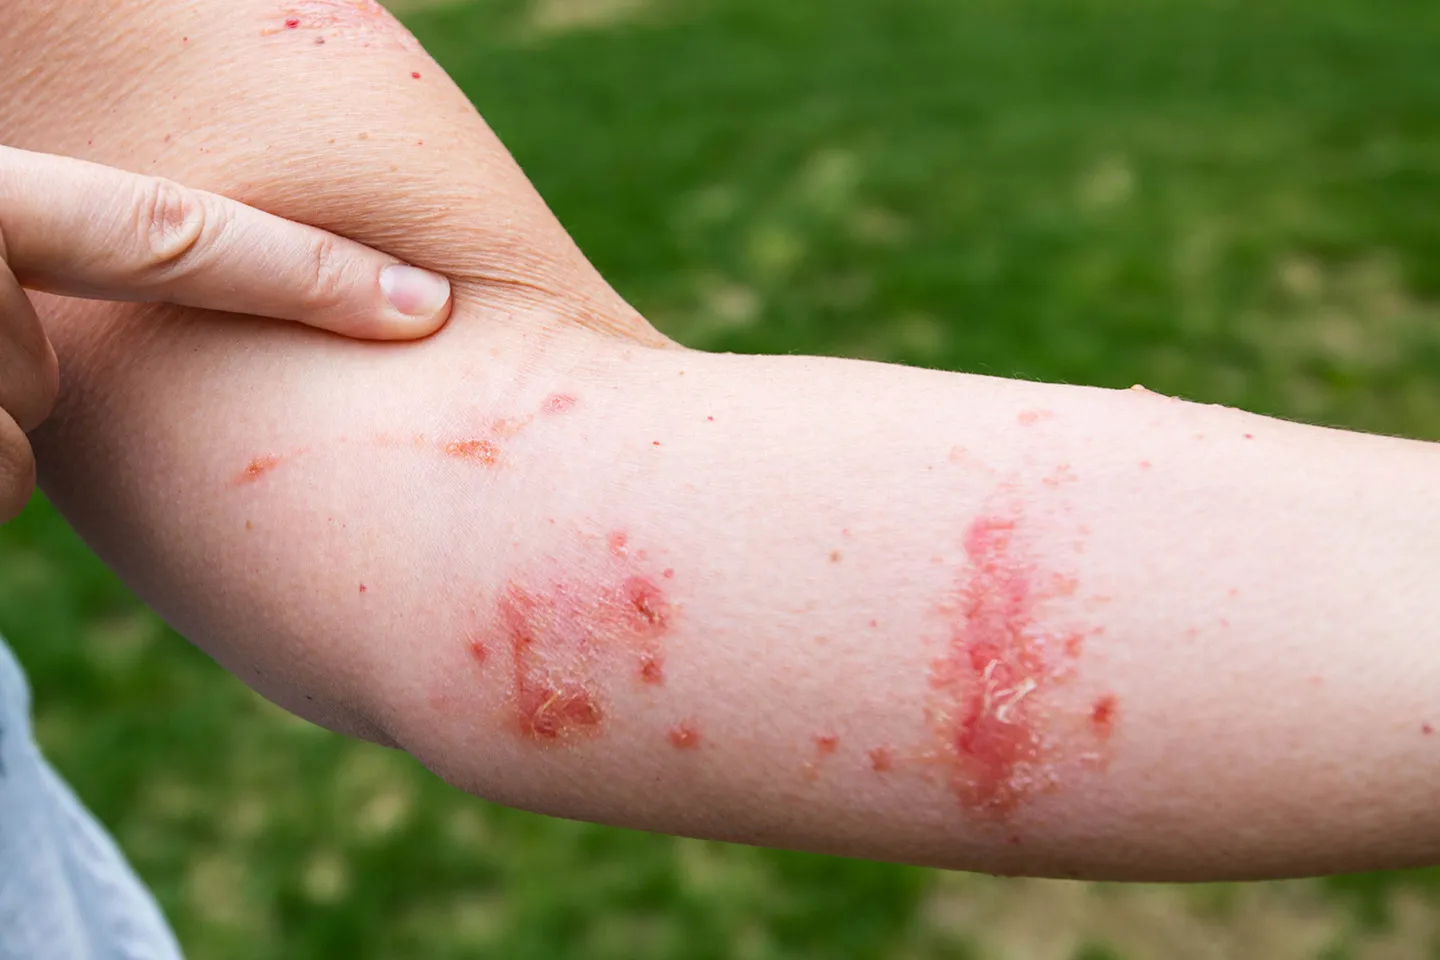 The allergic reaction causes a rash followed by bumps and blisters that itch